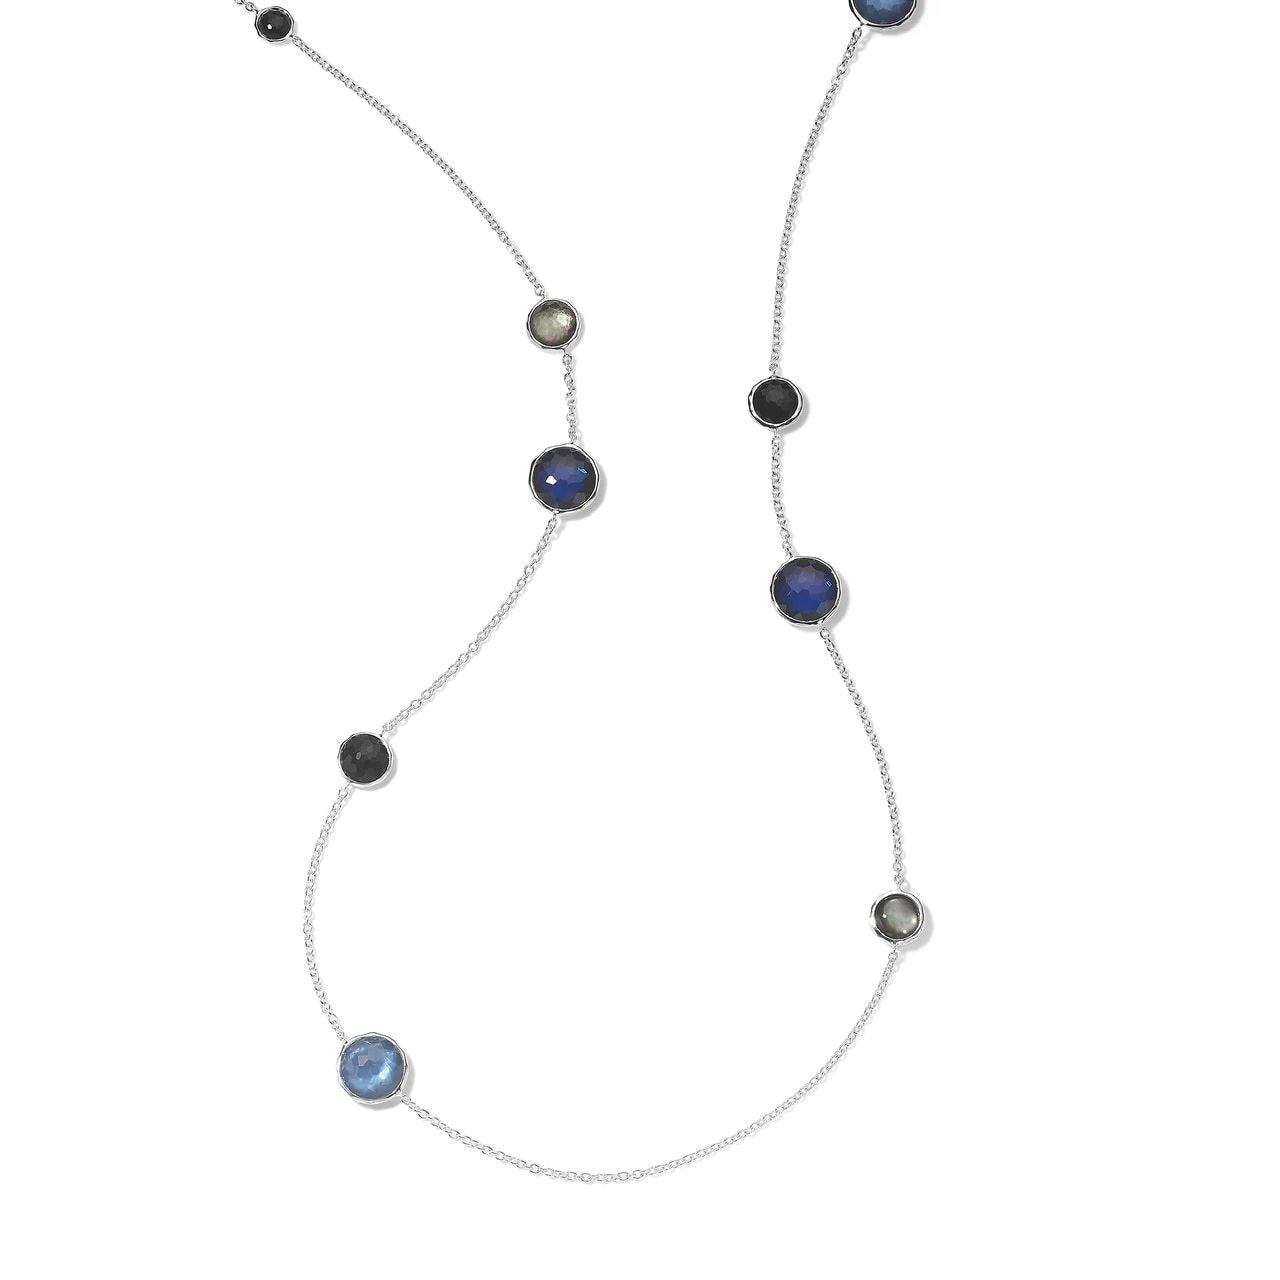 IPPOLITA Wonderland Sterling Silver Station Necklace in Astro Colorway